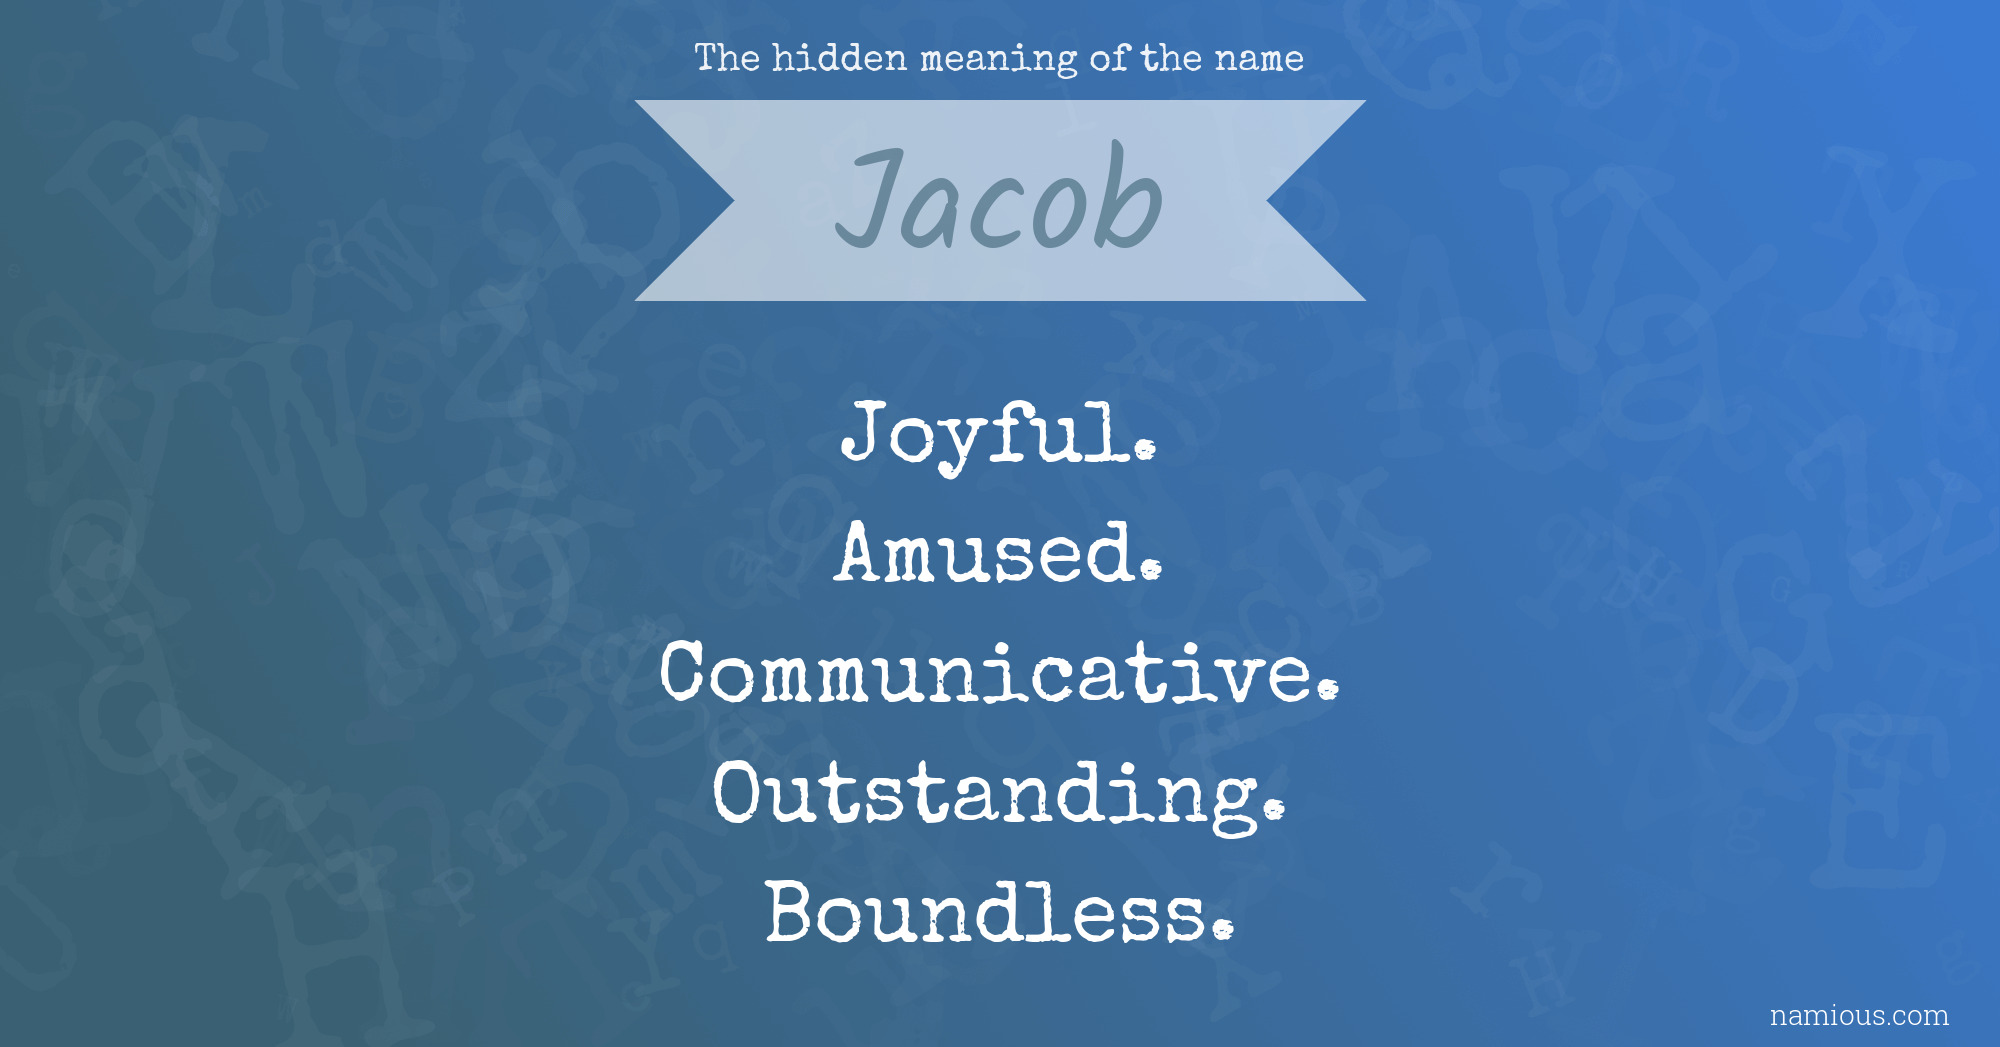 The hidden meaning of the name Jacob